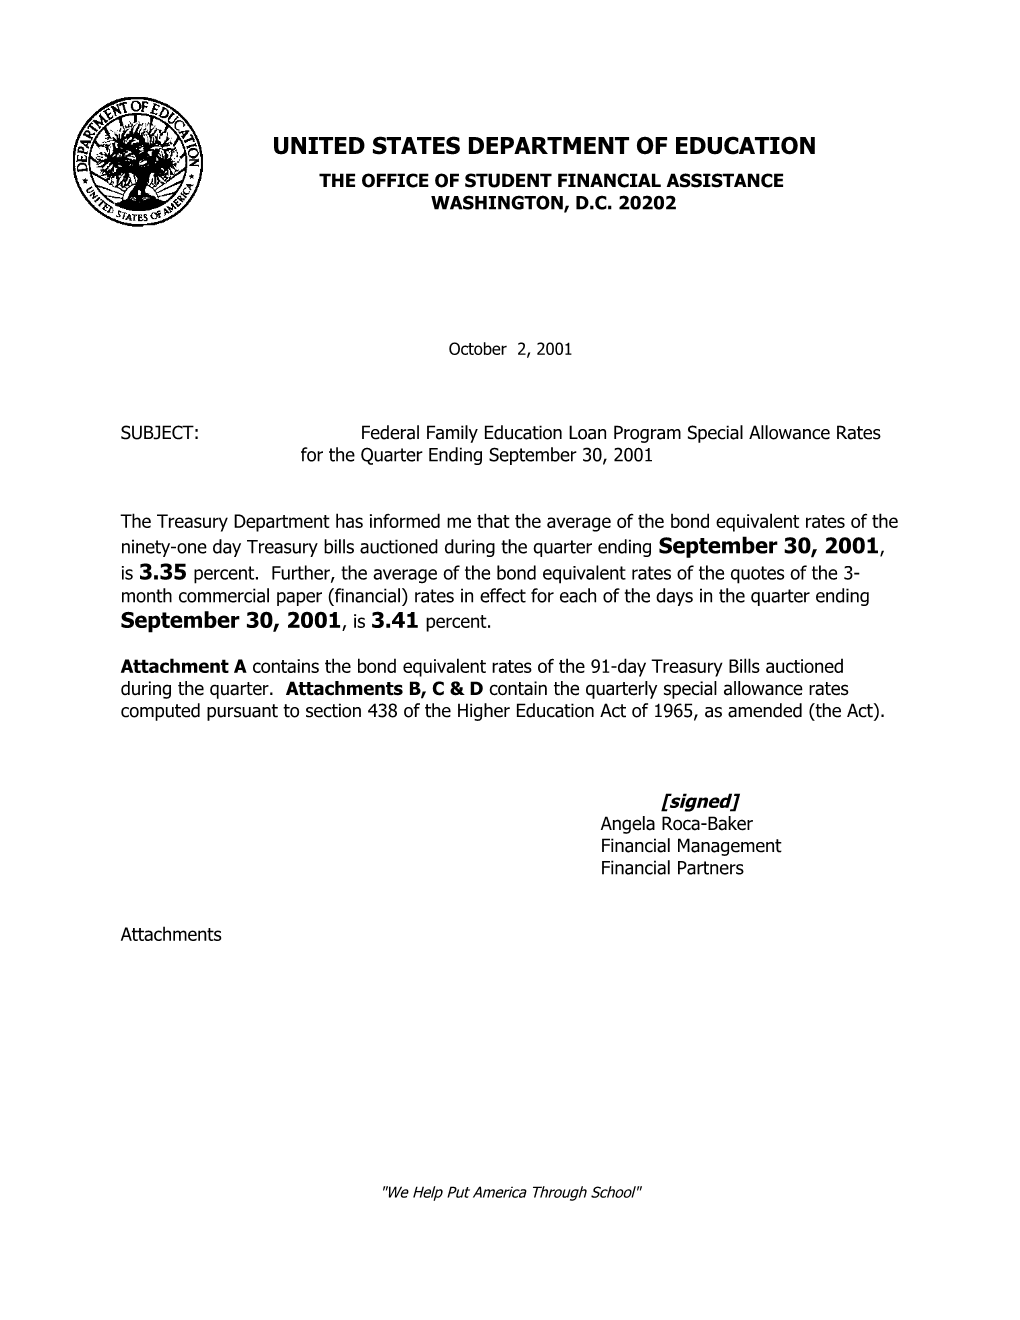 SUBJECT:Federal Family Education Loan Program Special Allowance Rates for the Quarter Ending